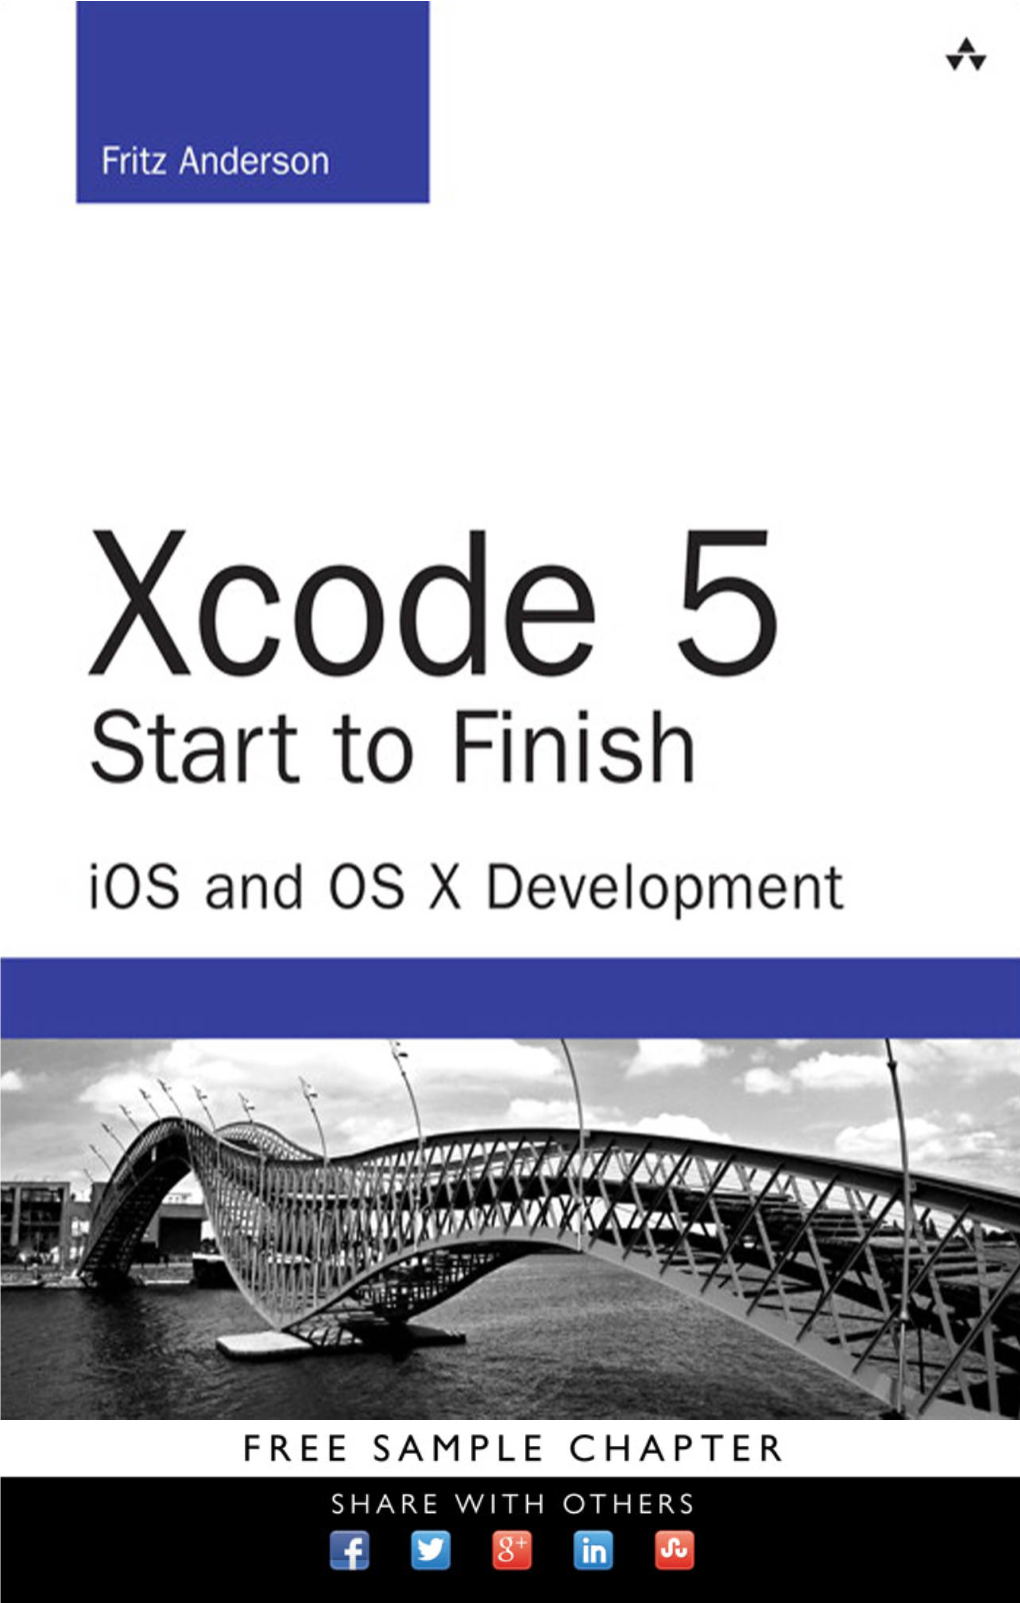 Xcode 5 Start to Finish: Ios and OS X Development